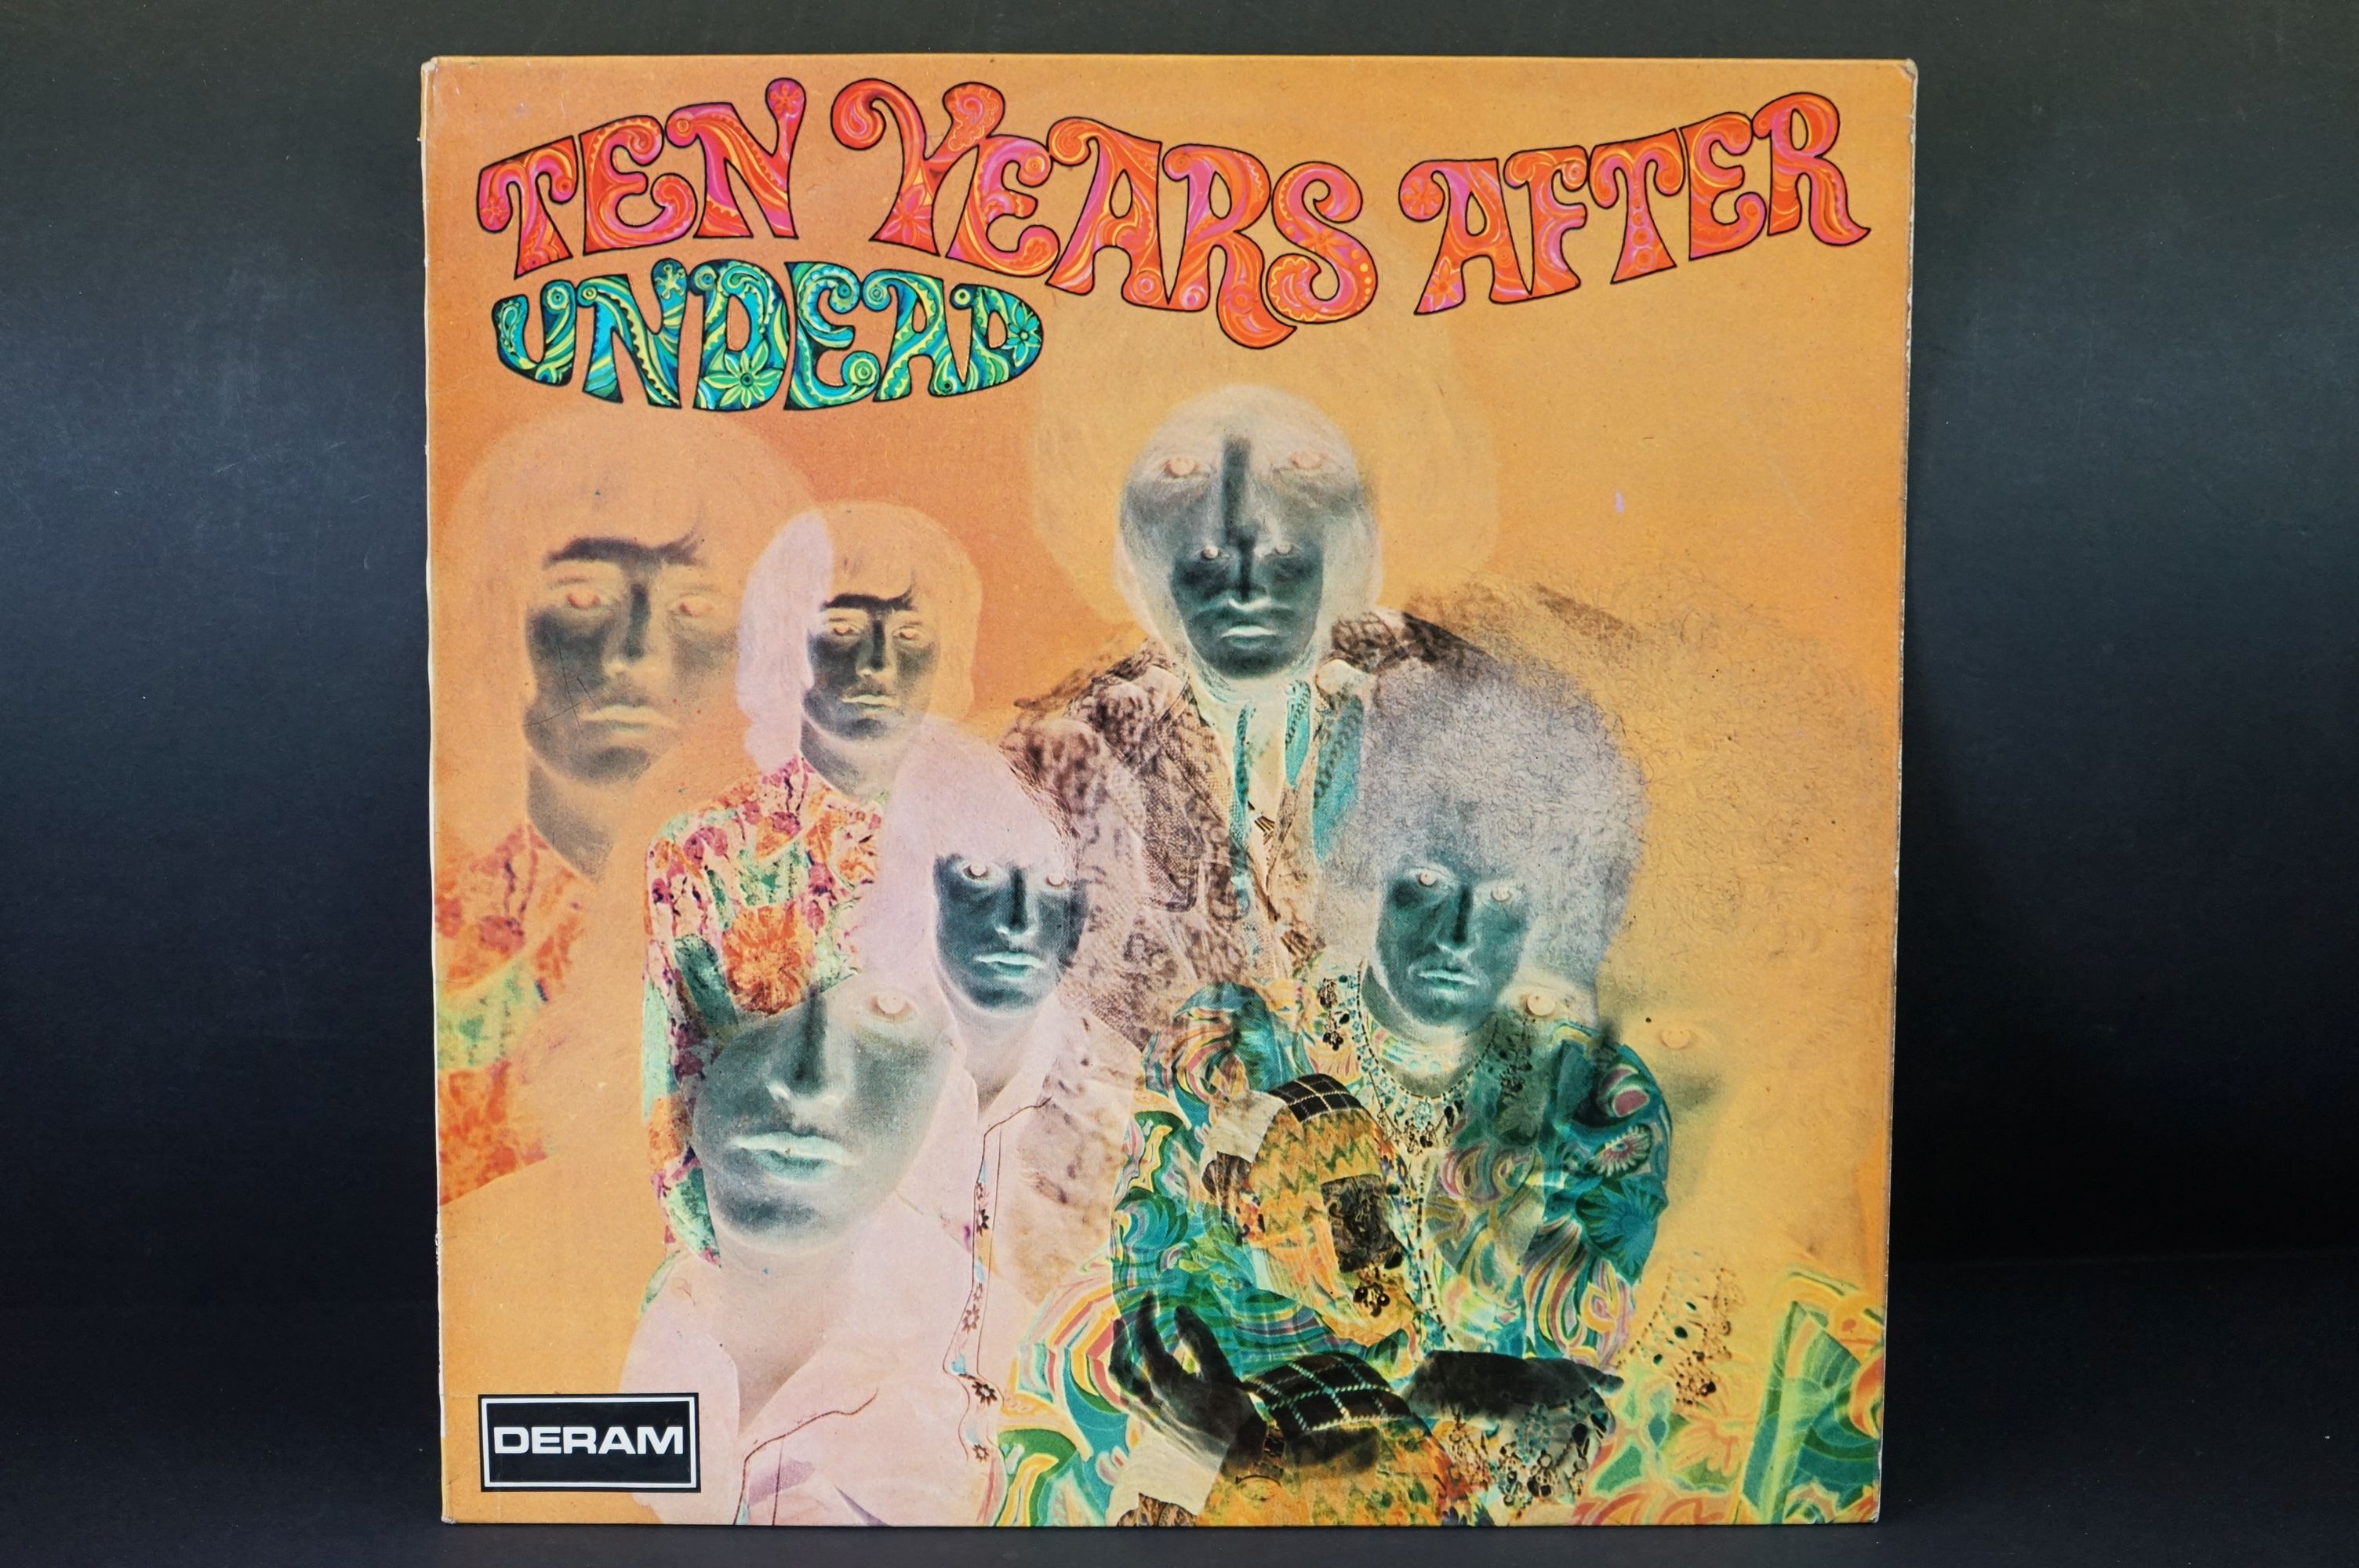 Vinyl - 5 original UK pressing Ten Years After albums on Deram Records to include: Undead (SML - Image 2 of 25